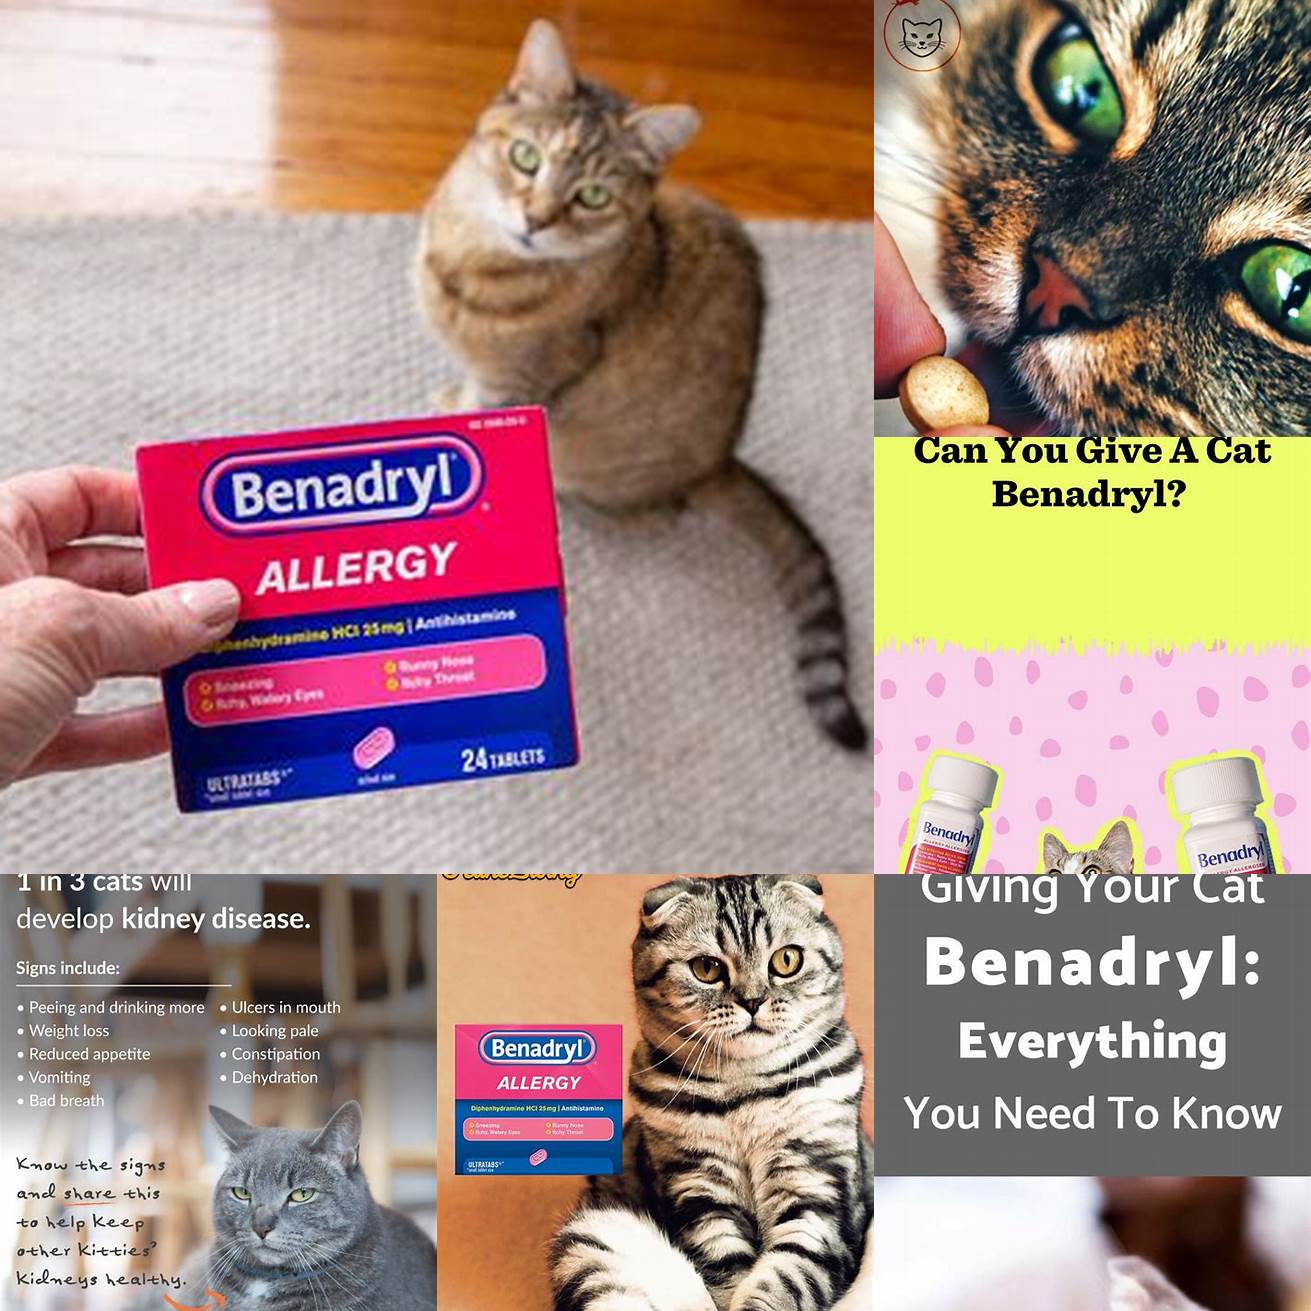 Avoid Giving Benadryl to Cats with Liver or Kidney Disease